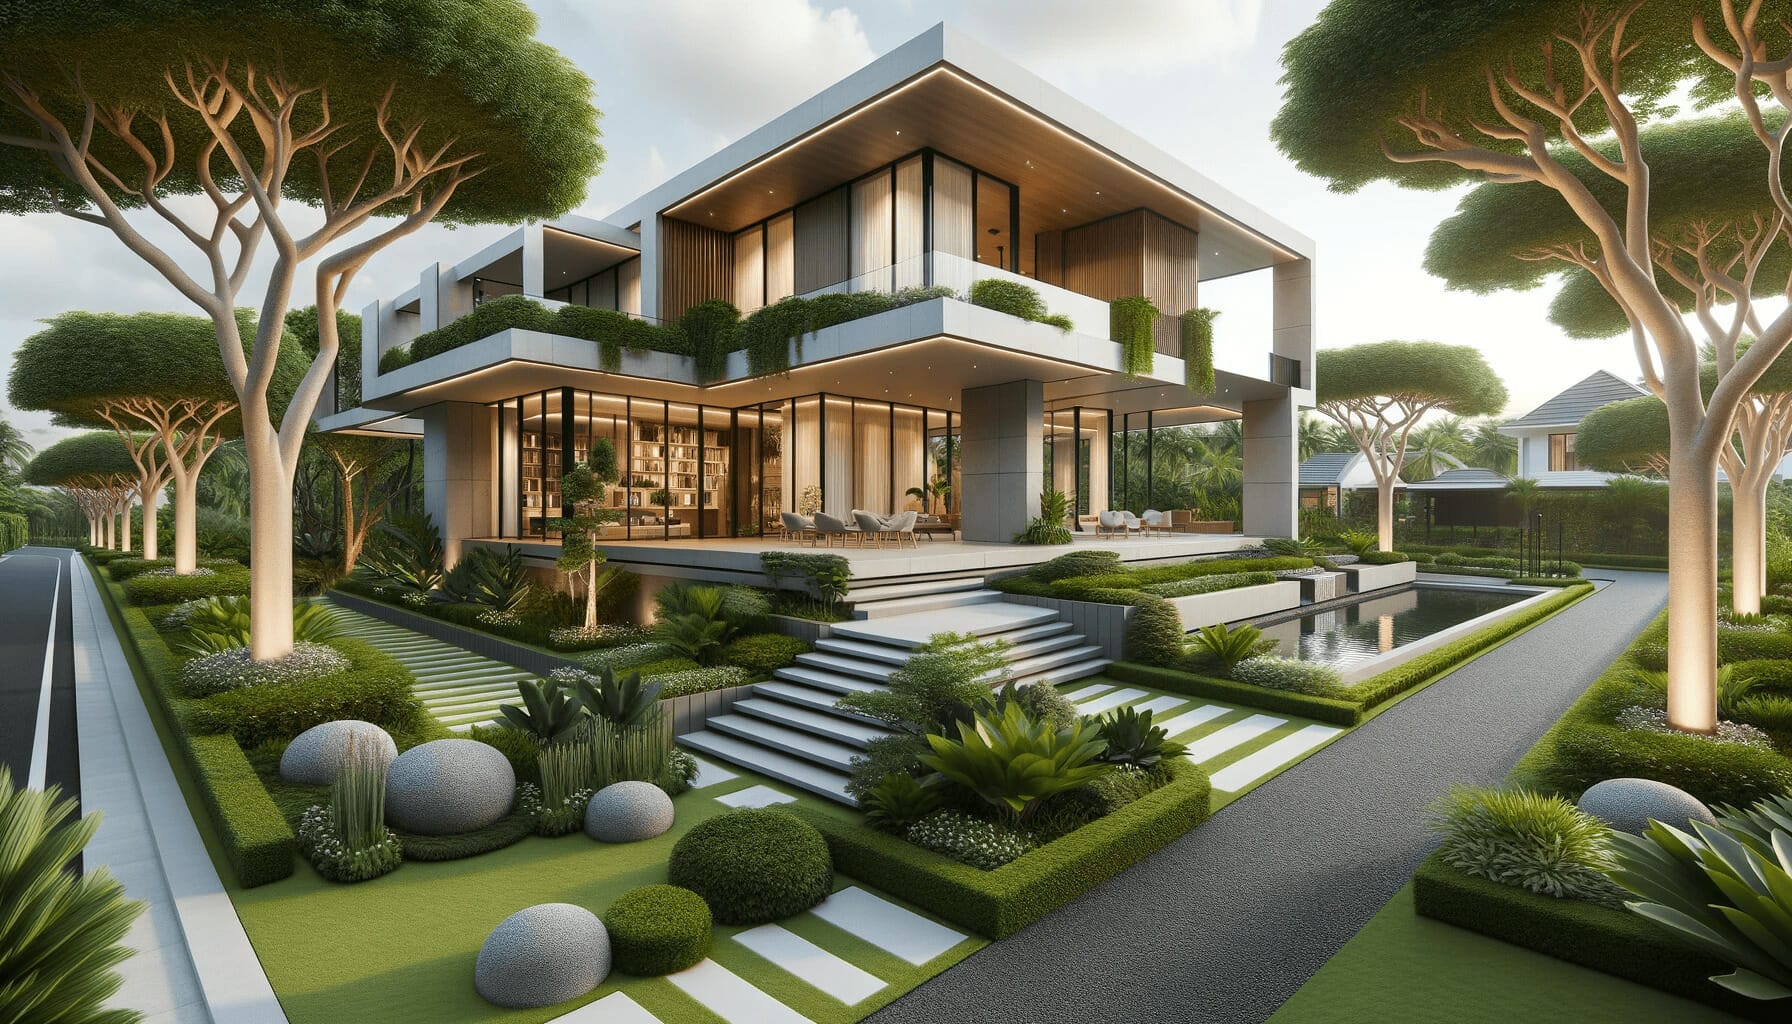 DALL·E 2023 10 16 13.53.02 Photo of a contemporary house with distinct architectural design elements placed amidst a landscaped garden